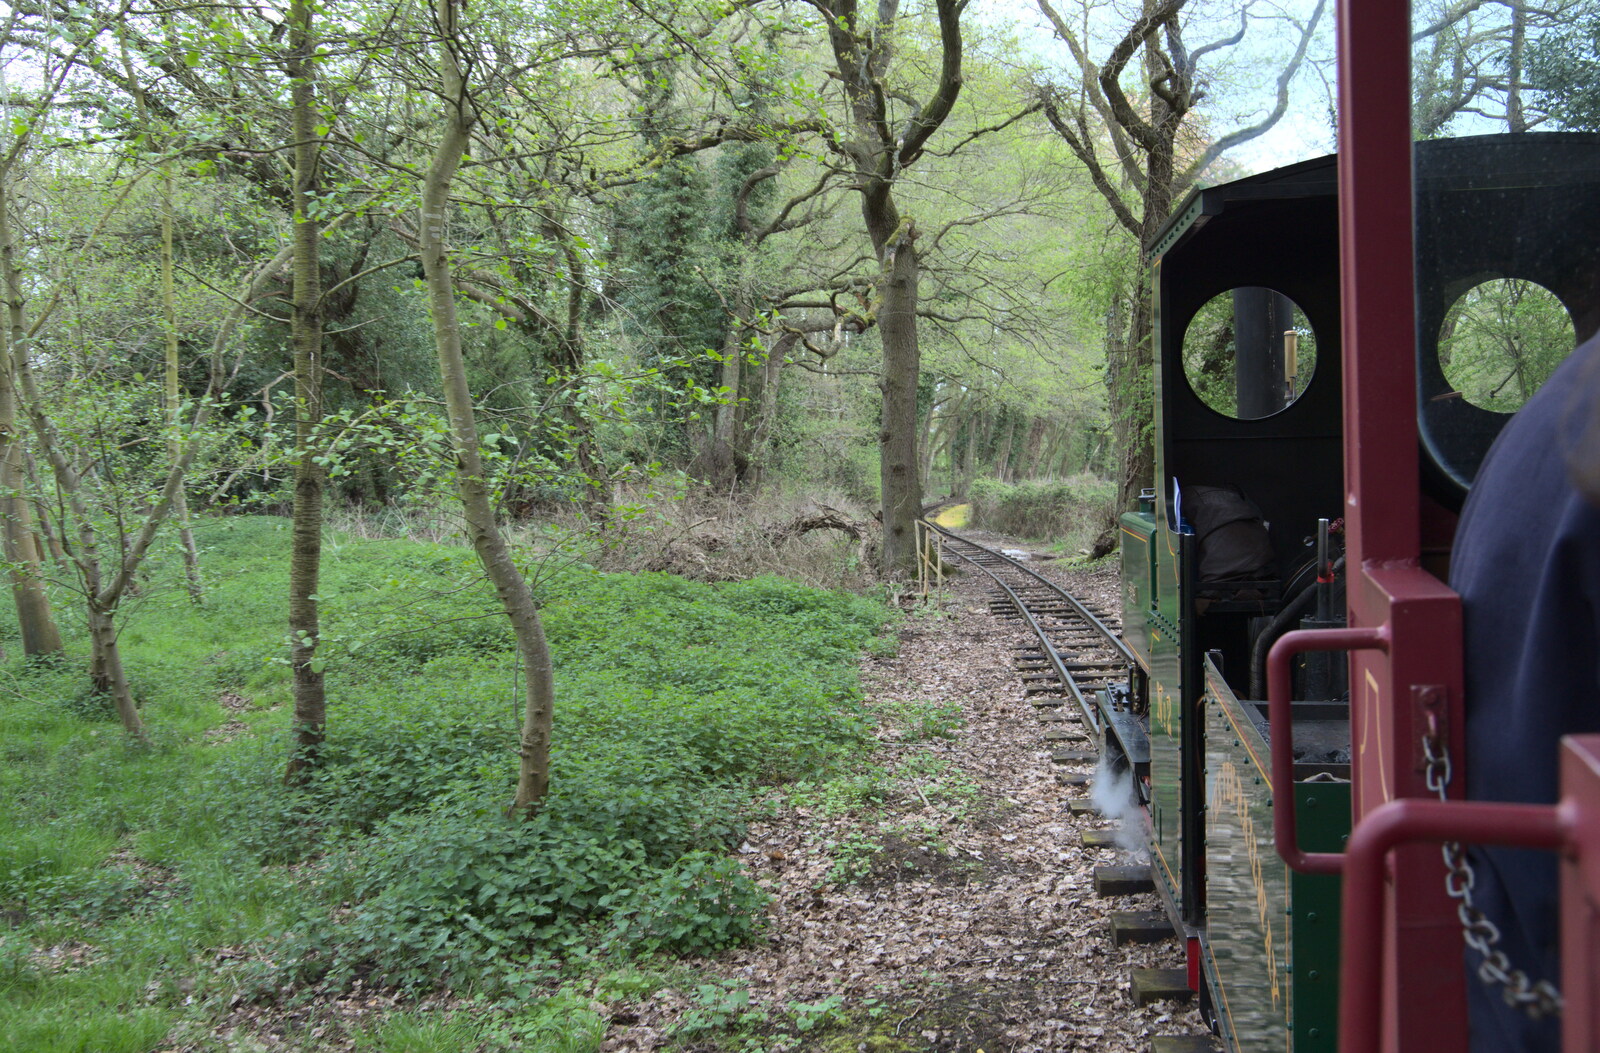 The train heads into the woods from The Heritage Steam Gala, Bressingham Steam Museum, Norfolk - 1st May 2023